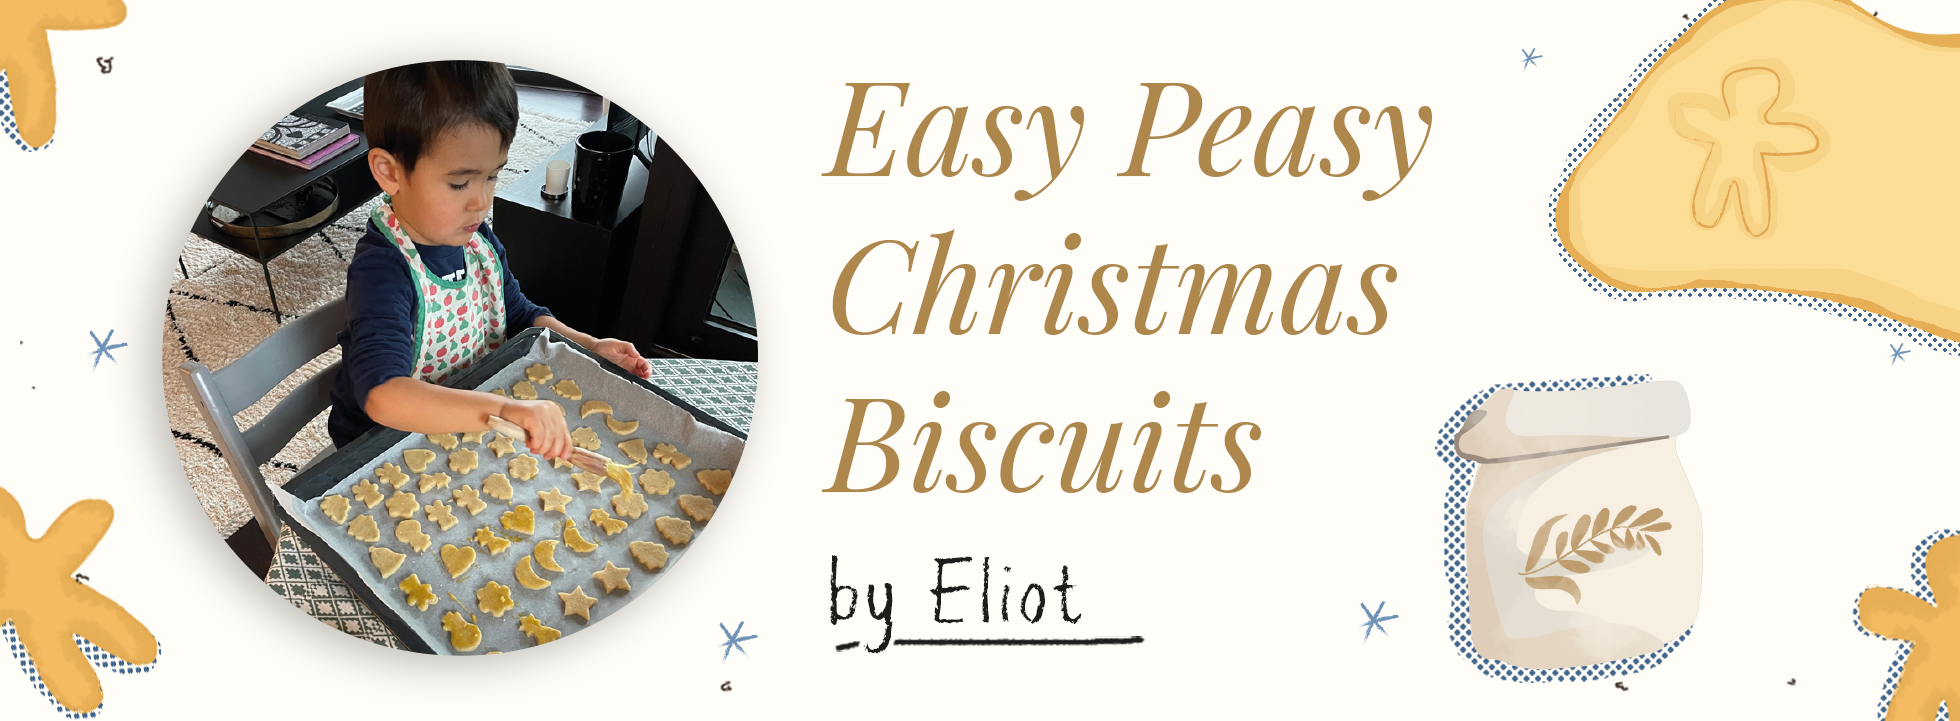 Easy Peasy Christmas Biscuits